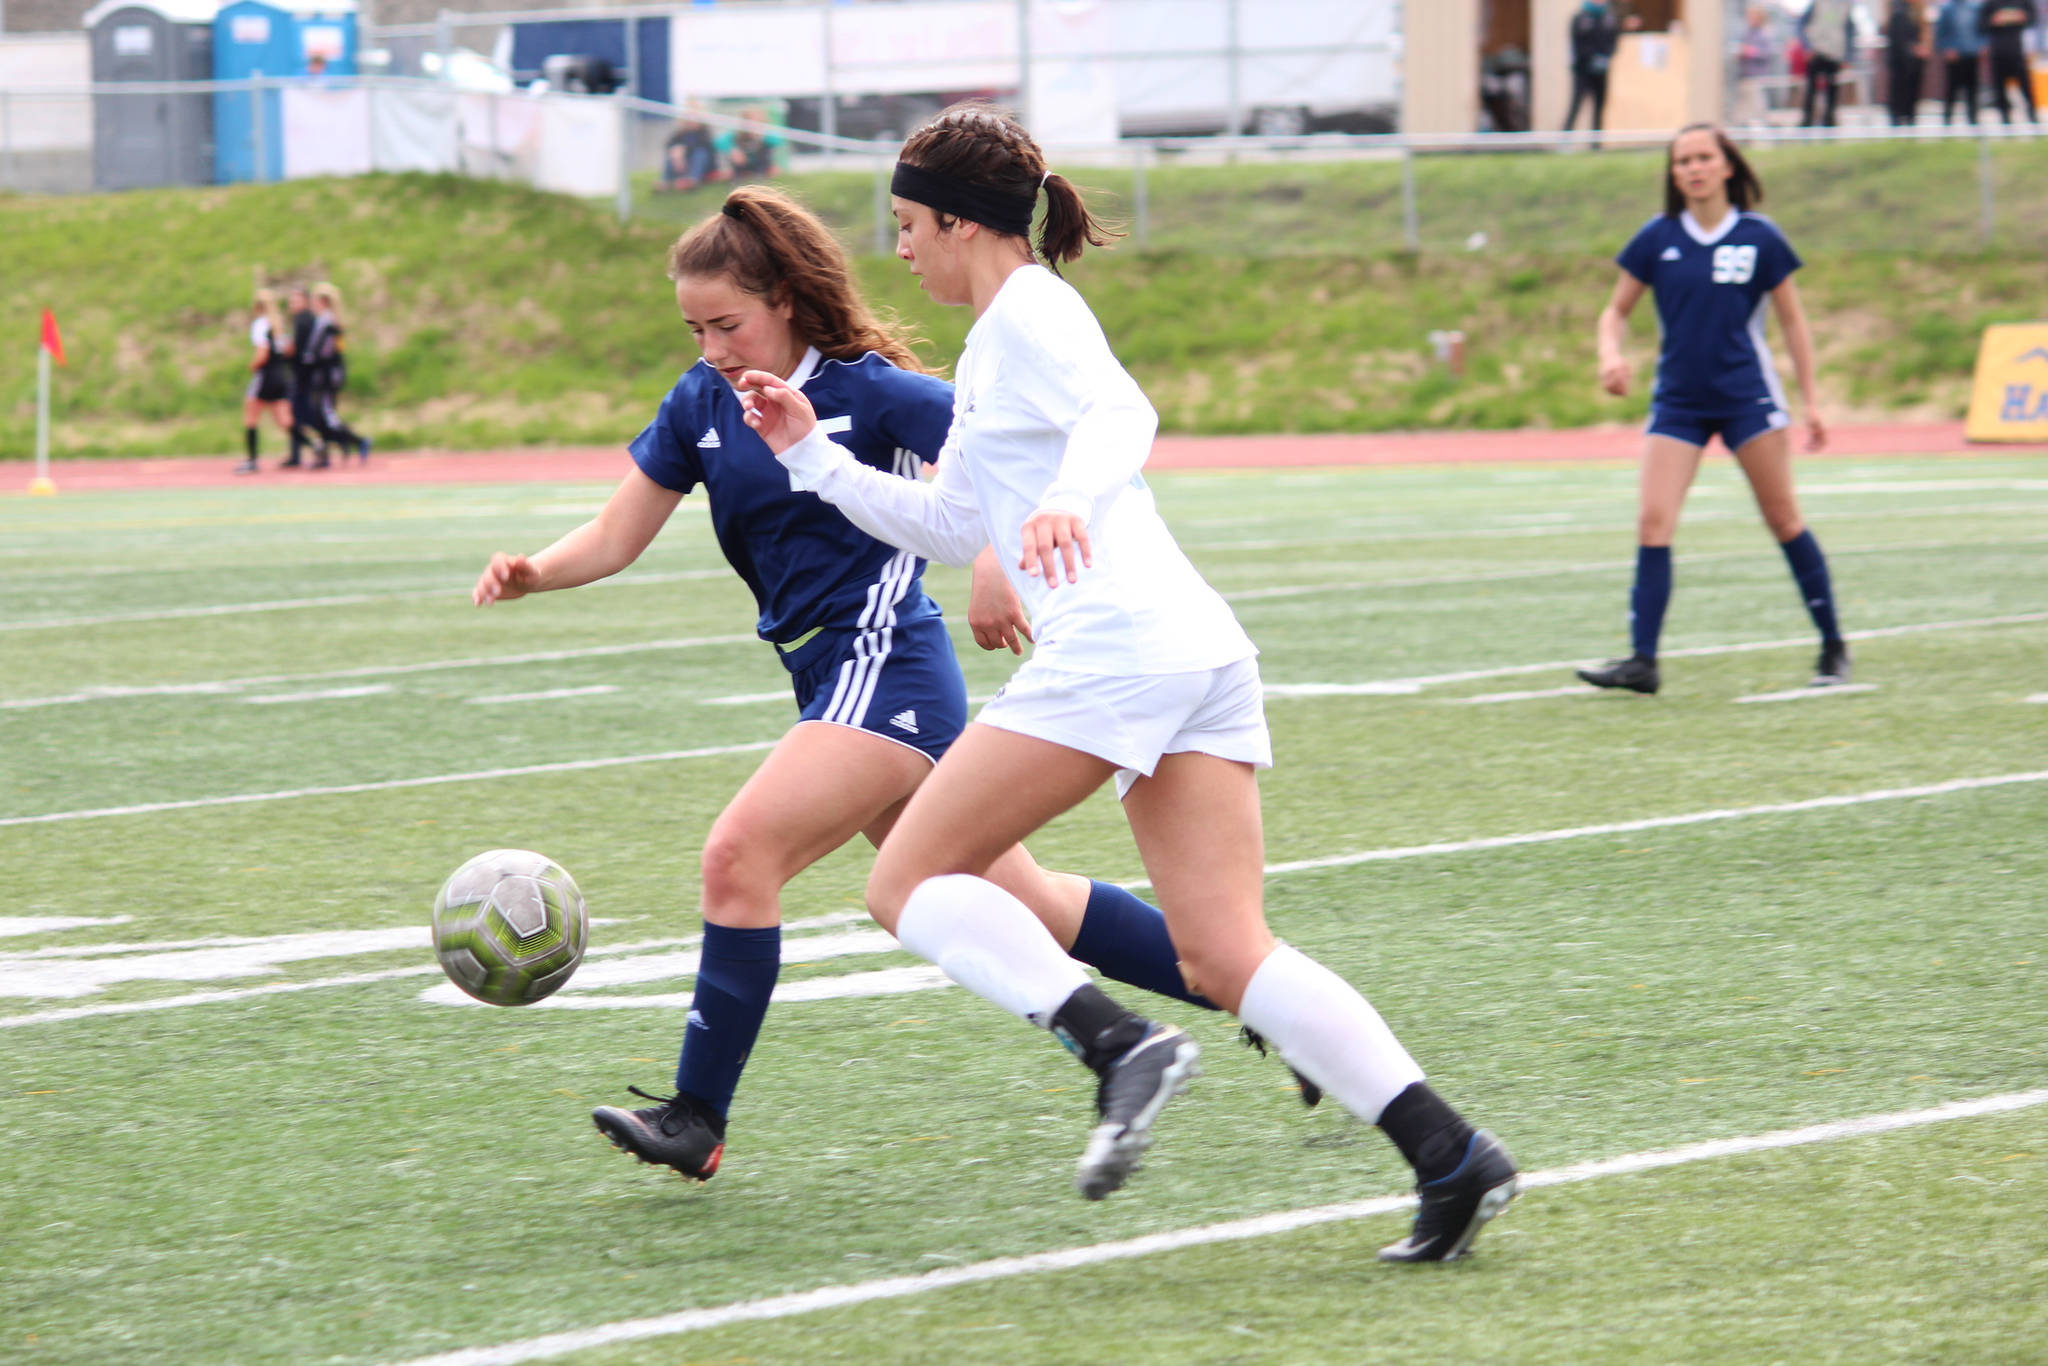 Soldotna’s Katherine Bramante and Thunder Mountain’s Keana Villanueva race to the ball during a semifinal game at the Division II state soccer championships Friday, May 24, 2019 at Service High School in Anchorage, Alaska. (Photo by Megan Pacer/Homer News)